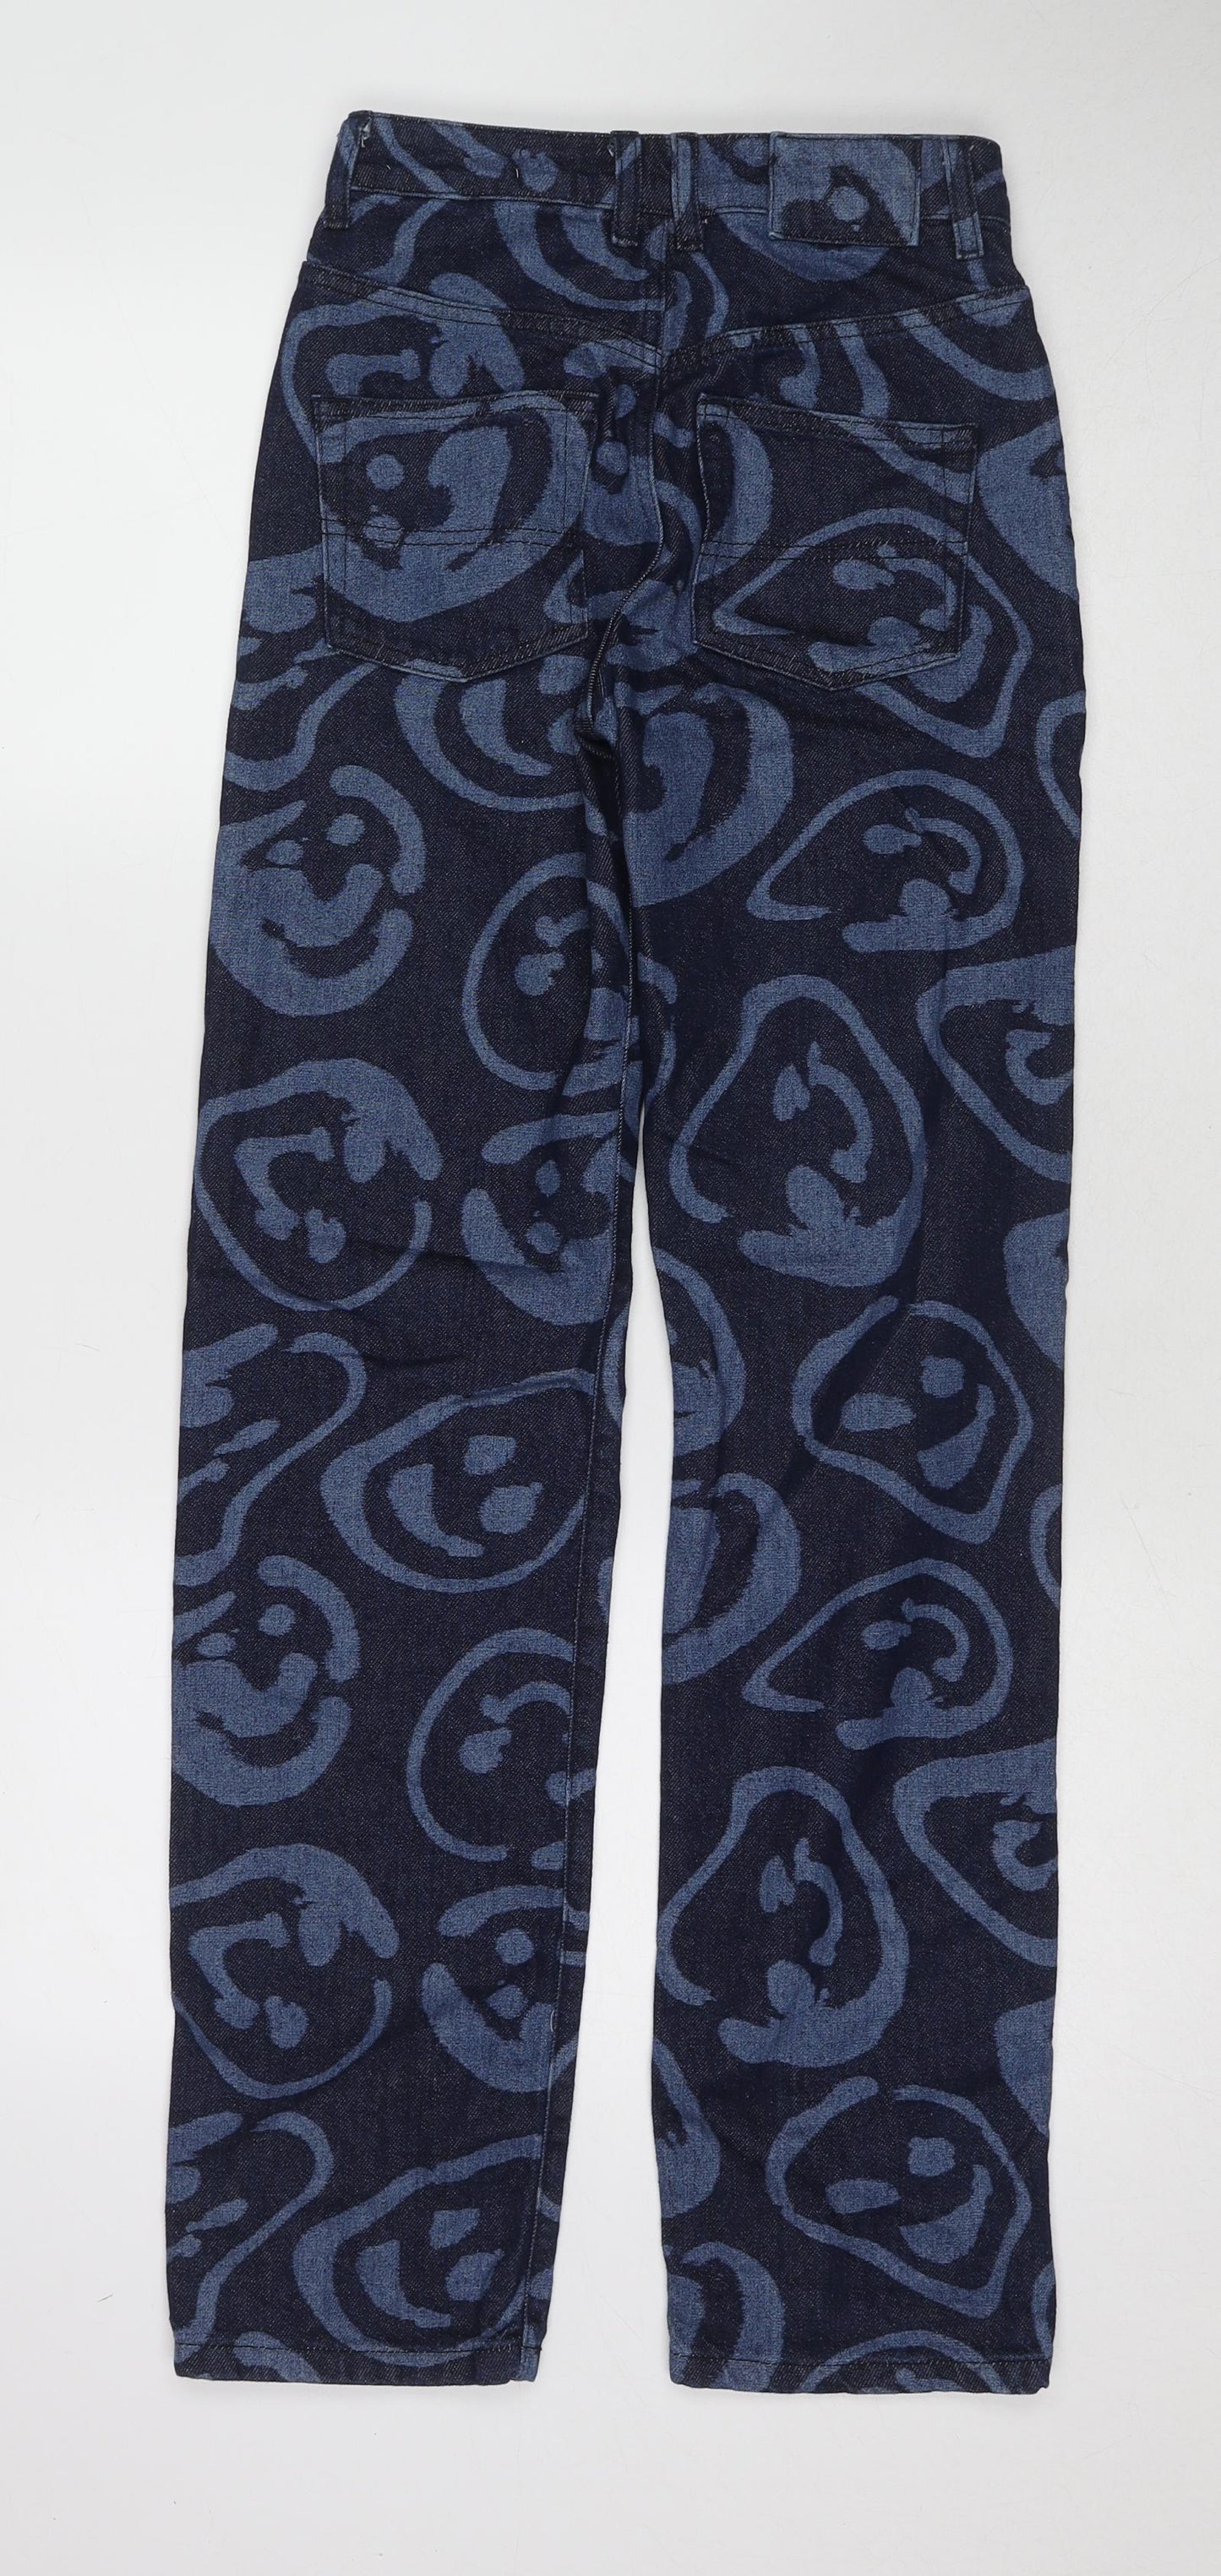 COLLUSION Womens Blue Geometric Cotton Straight Jeans Size 24 L32 in Regular Zip - Smiley Face Pattern